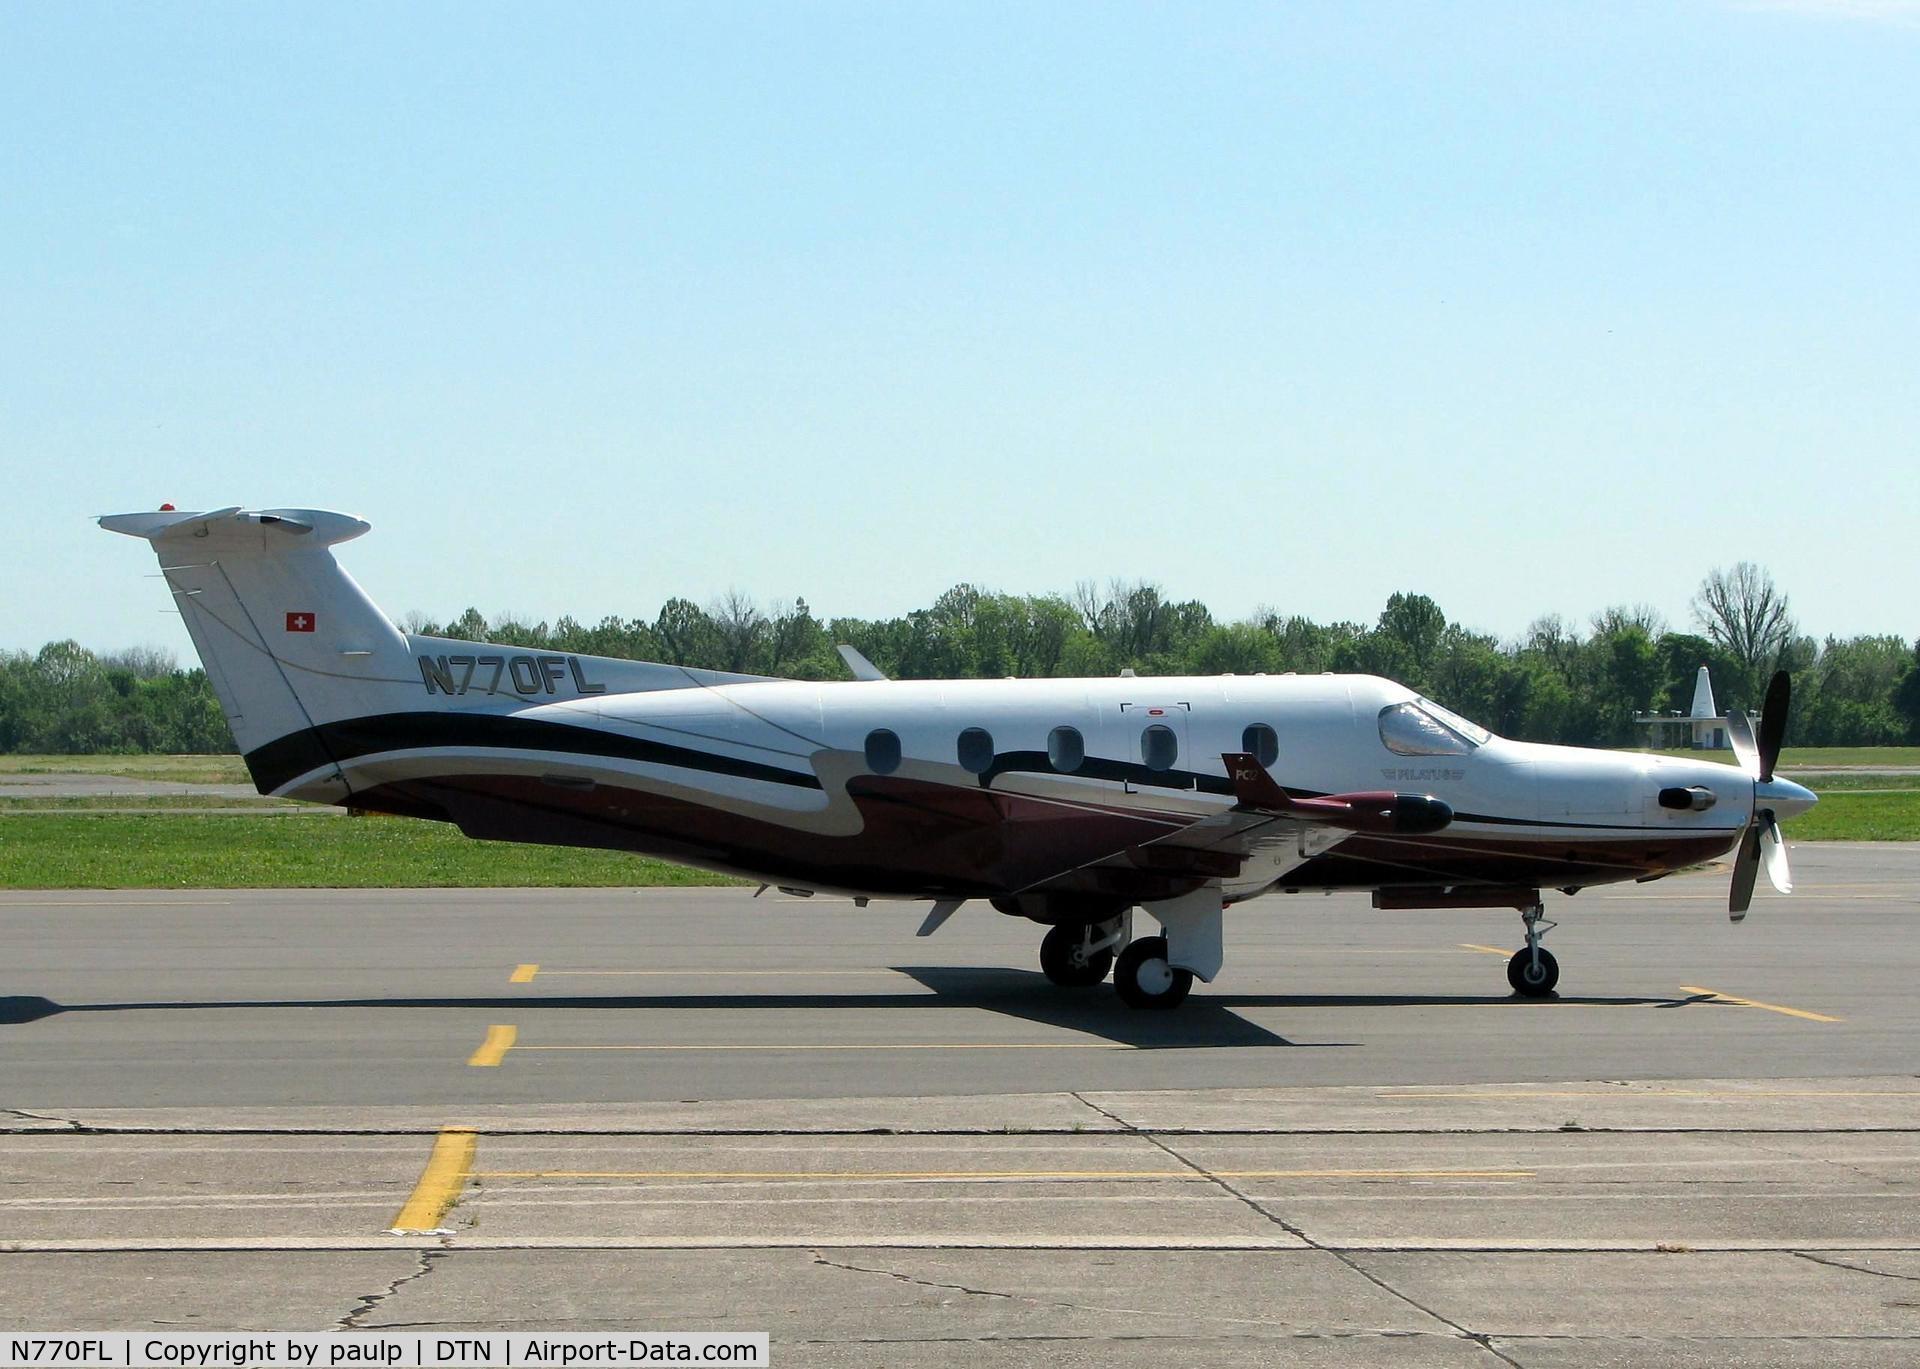 N770FL, 2003 Pilatus PC-12/45 C/N 501, At Downtown Shreveport. An awesome aircraft!